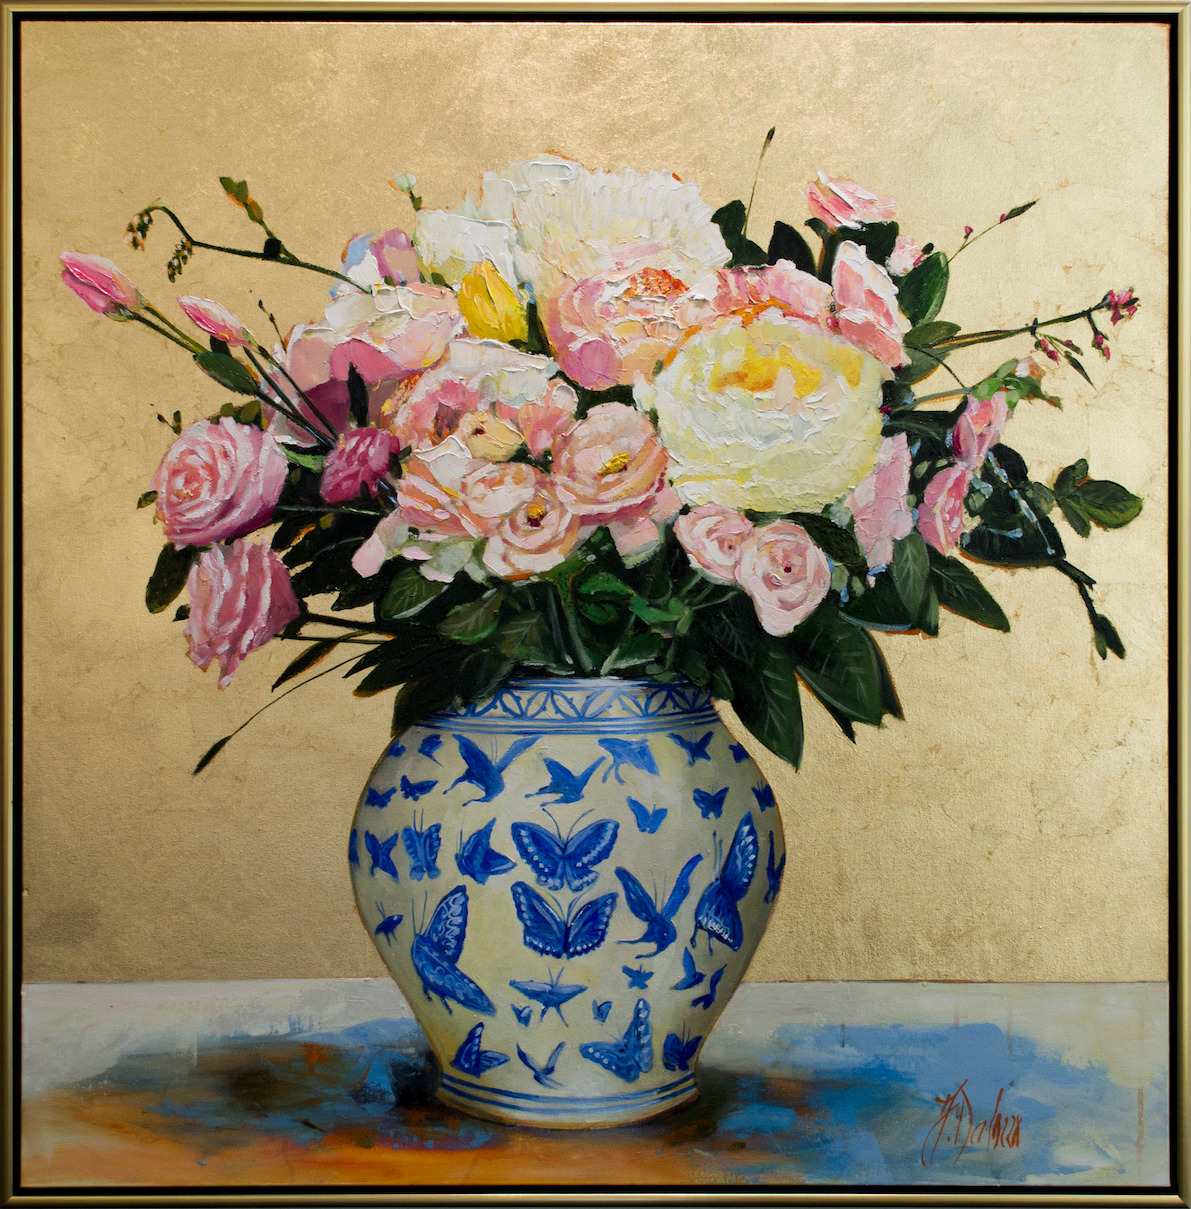 Framed Front View Of Still Life Painting "Pink Melody" By Judith Dalozzo